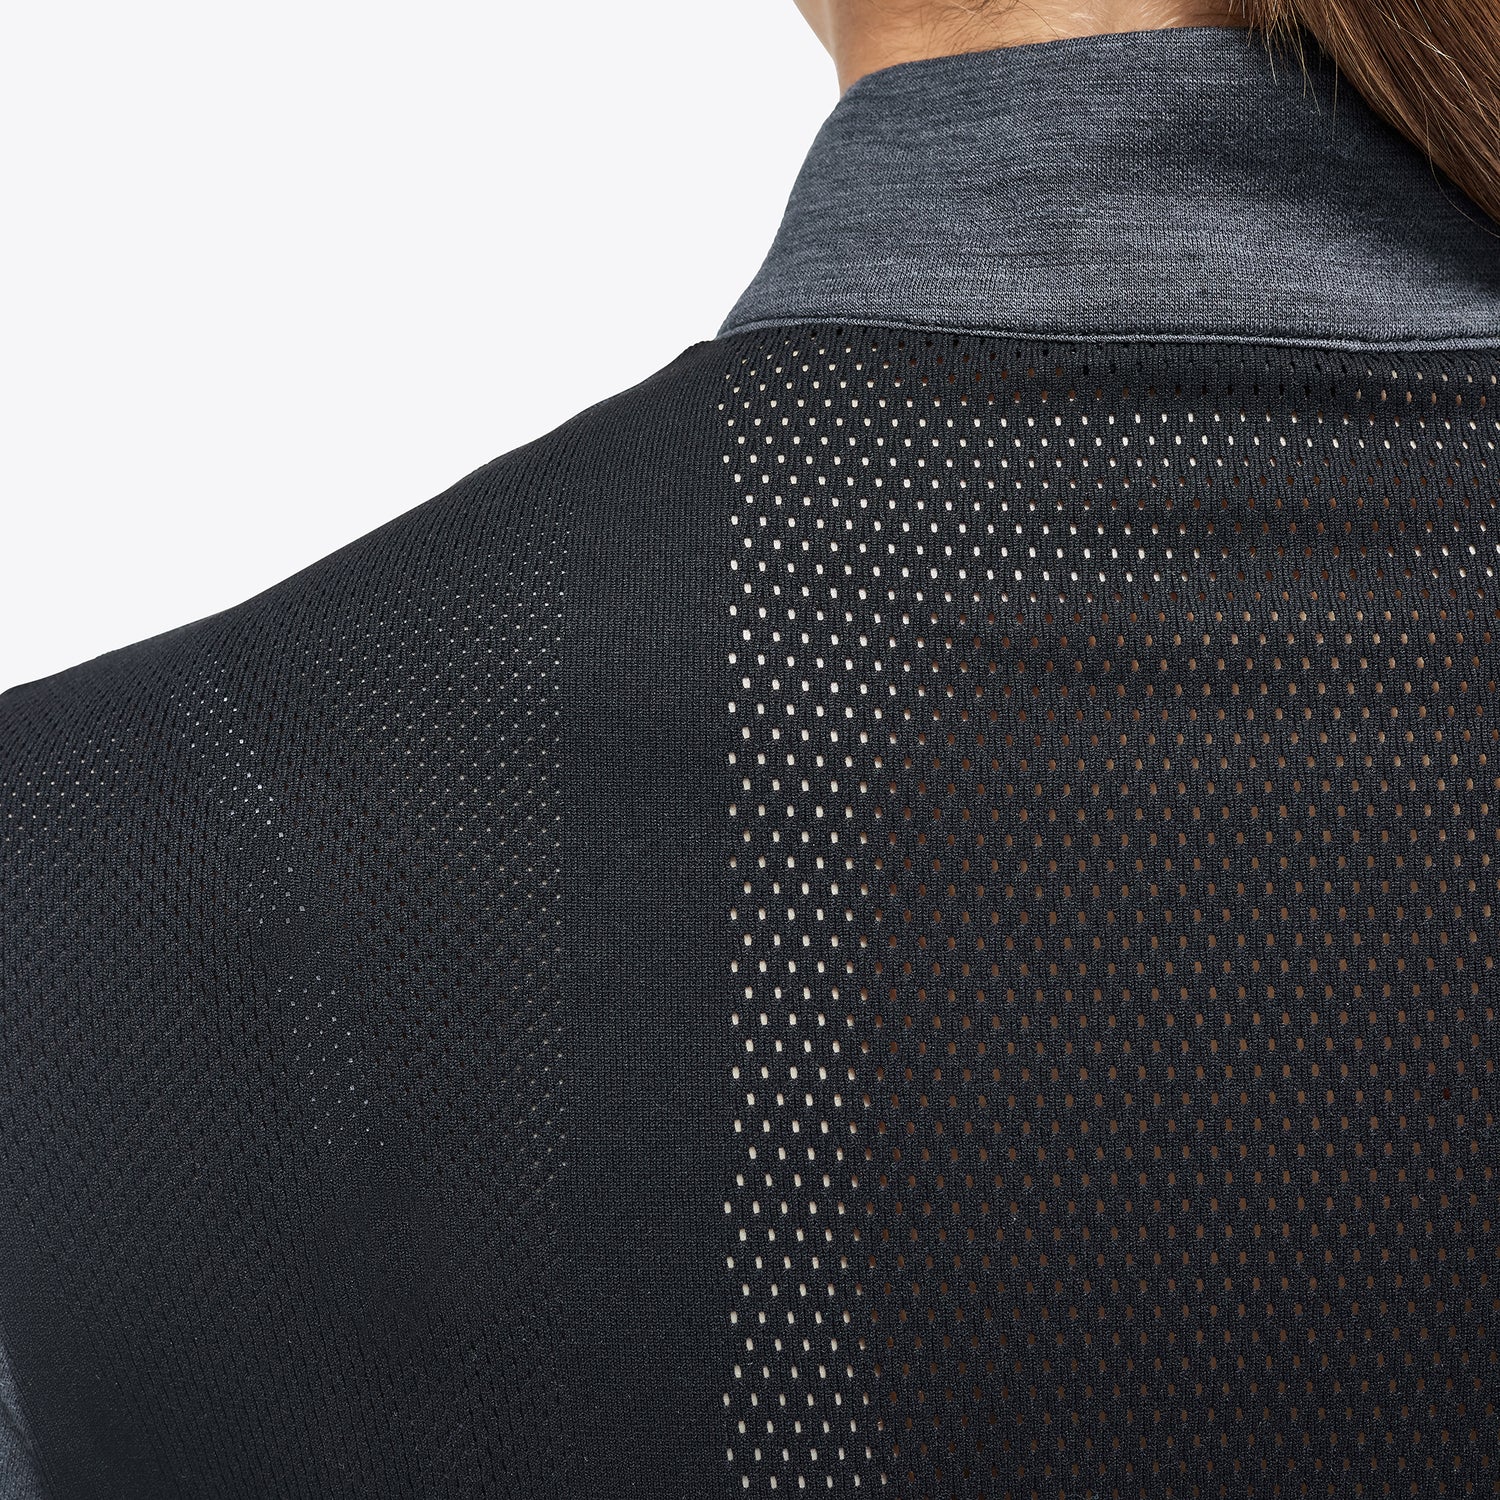 Perforated base layer